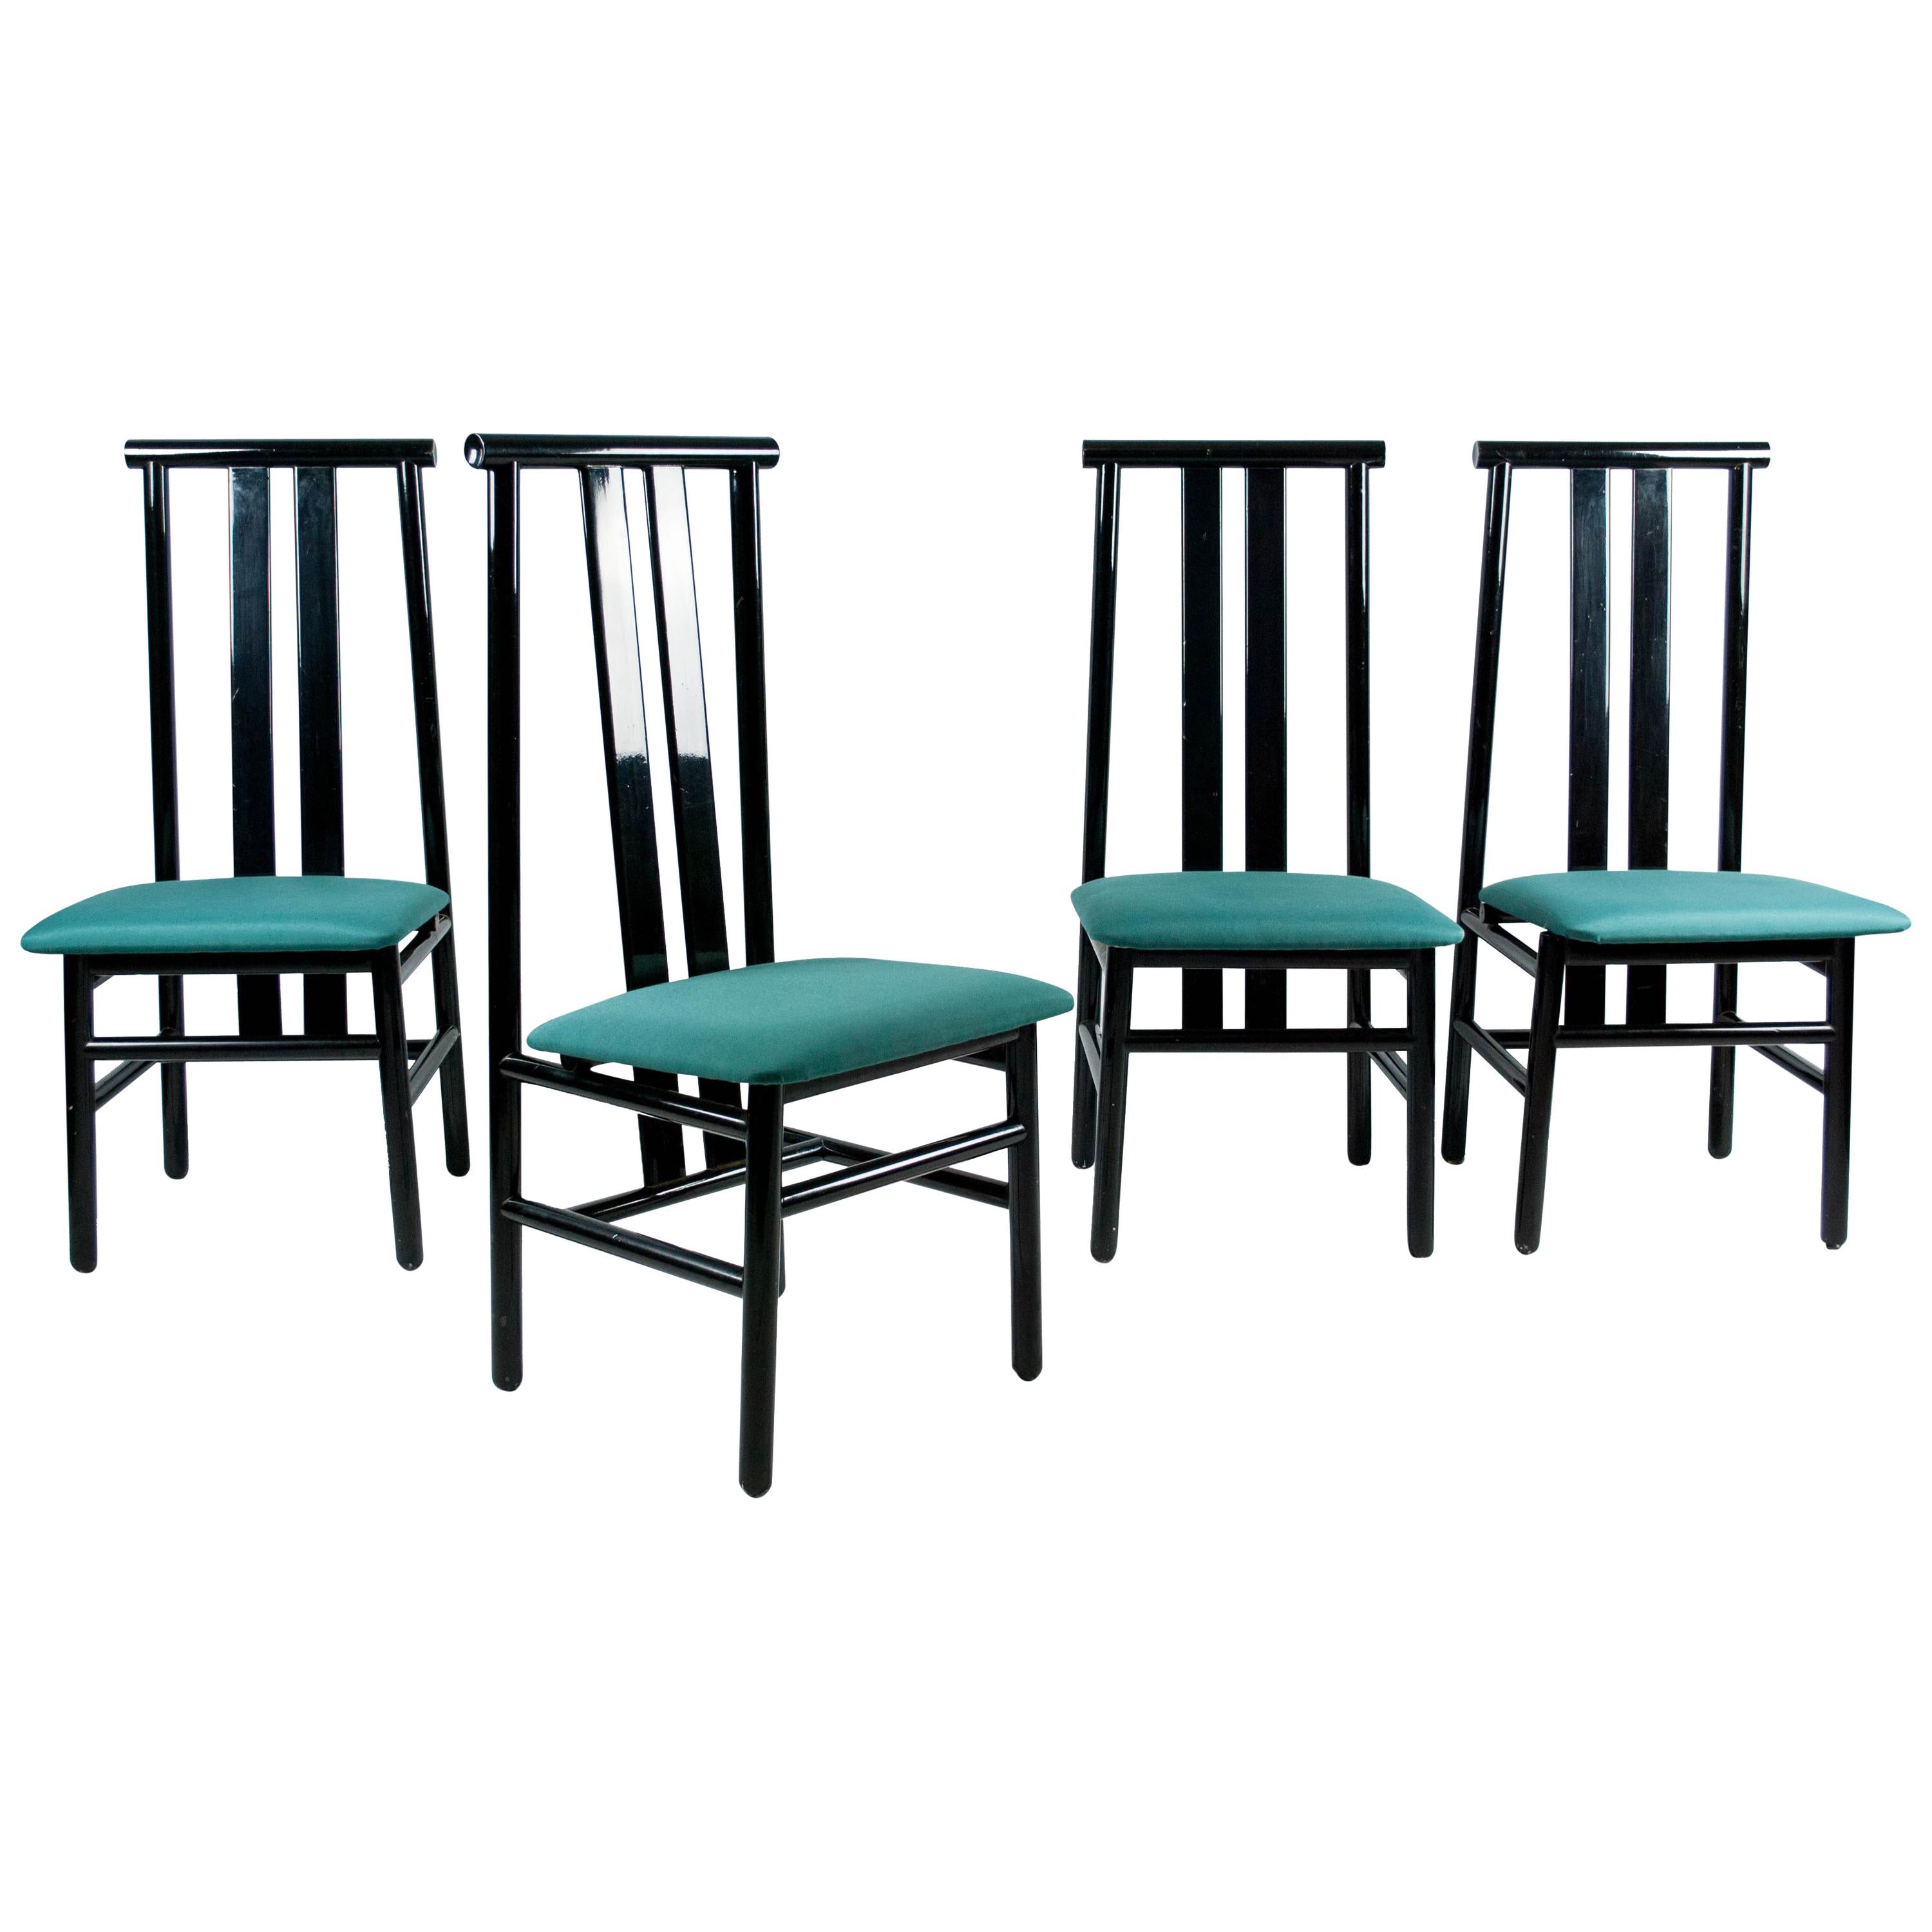 Sarian 'Zea' Modern High-Backed Black Lacquered Chairs for Tisettanta, Italy For Sale